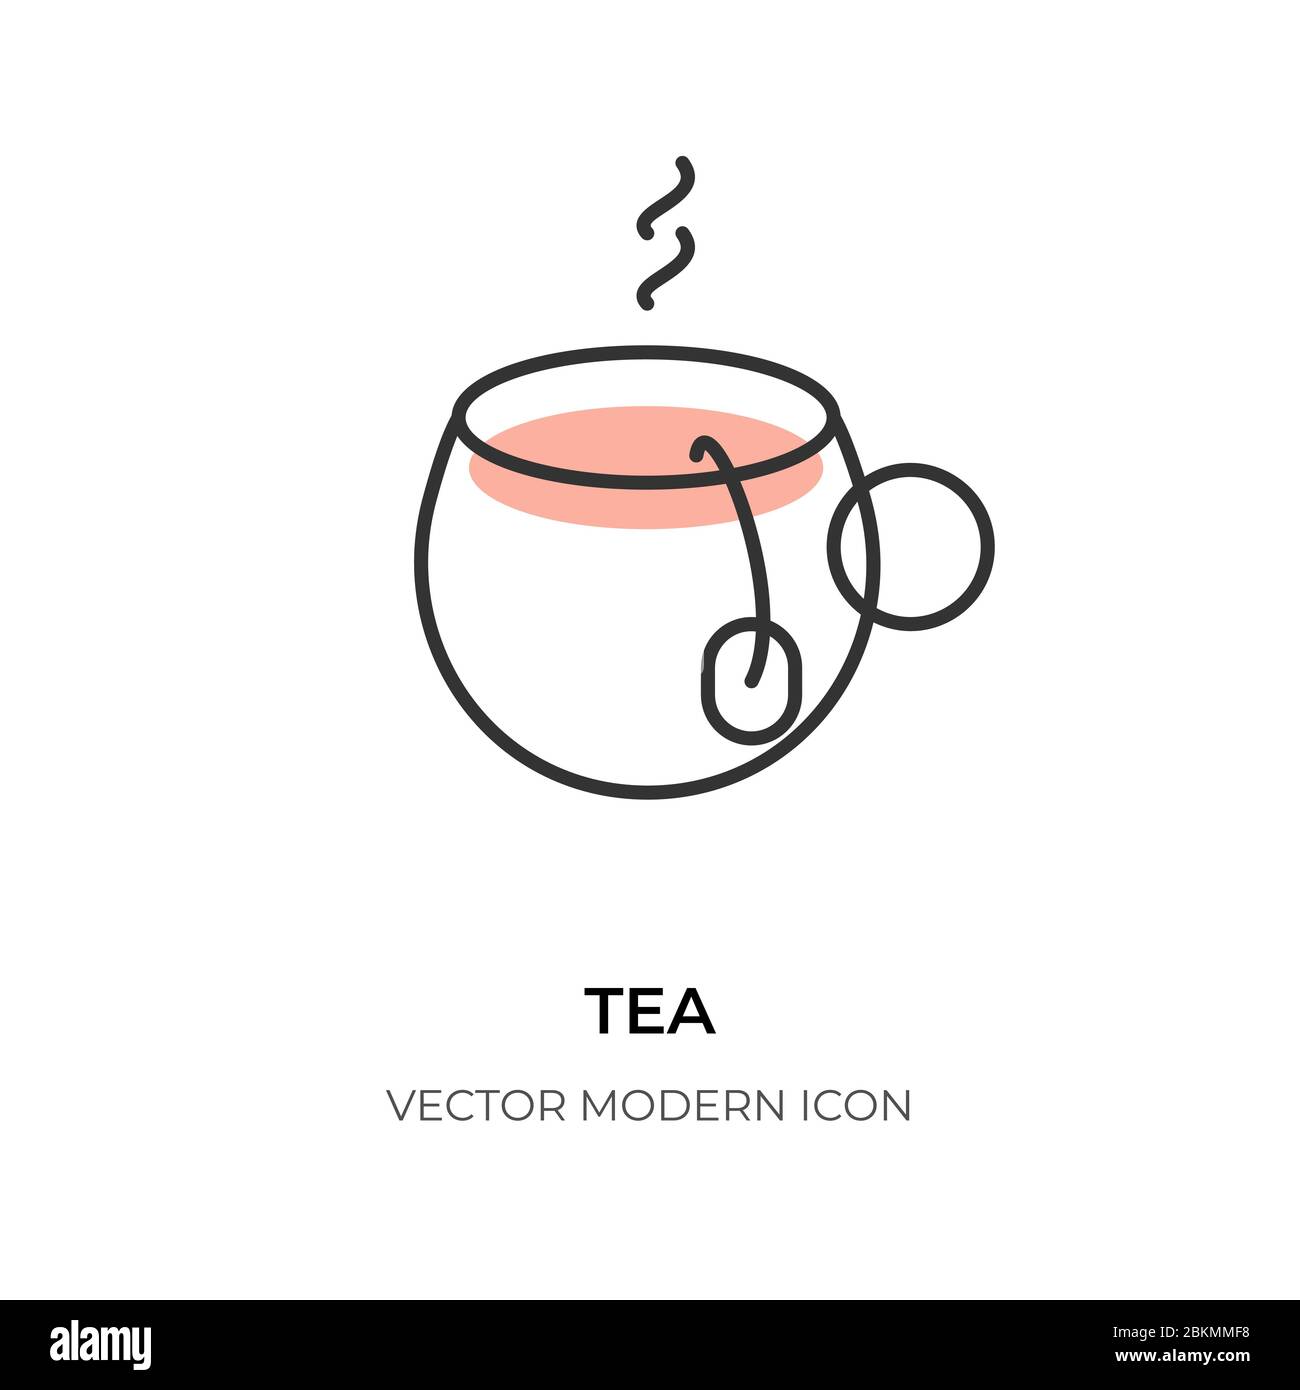 Hot tea cup flat line icon. Contour emblem logo template of traditional green tea. Simple shape of glass mug with tea bag. Symbol organic herbal hot drink closeup Isolated on white vector illustration Stock Vector